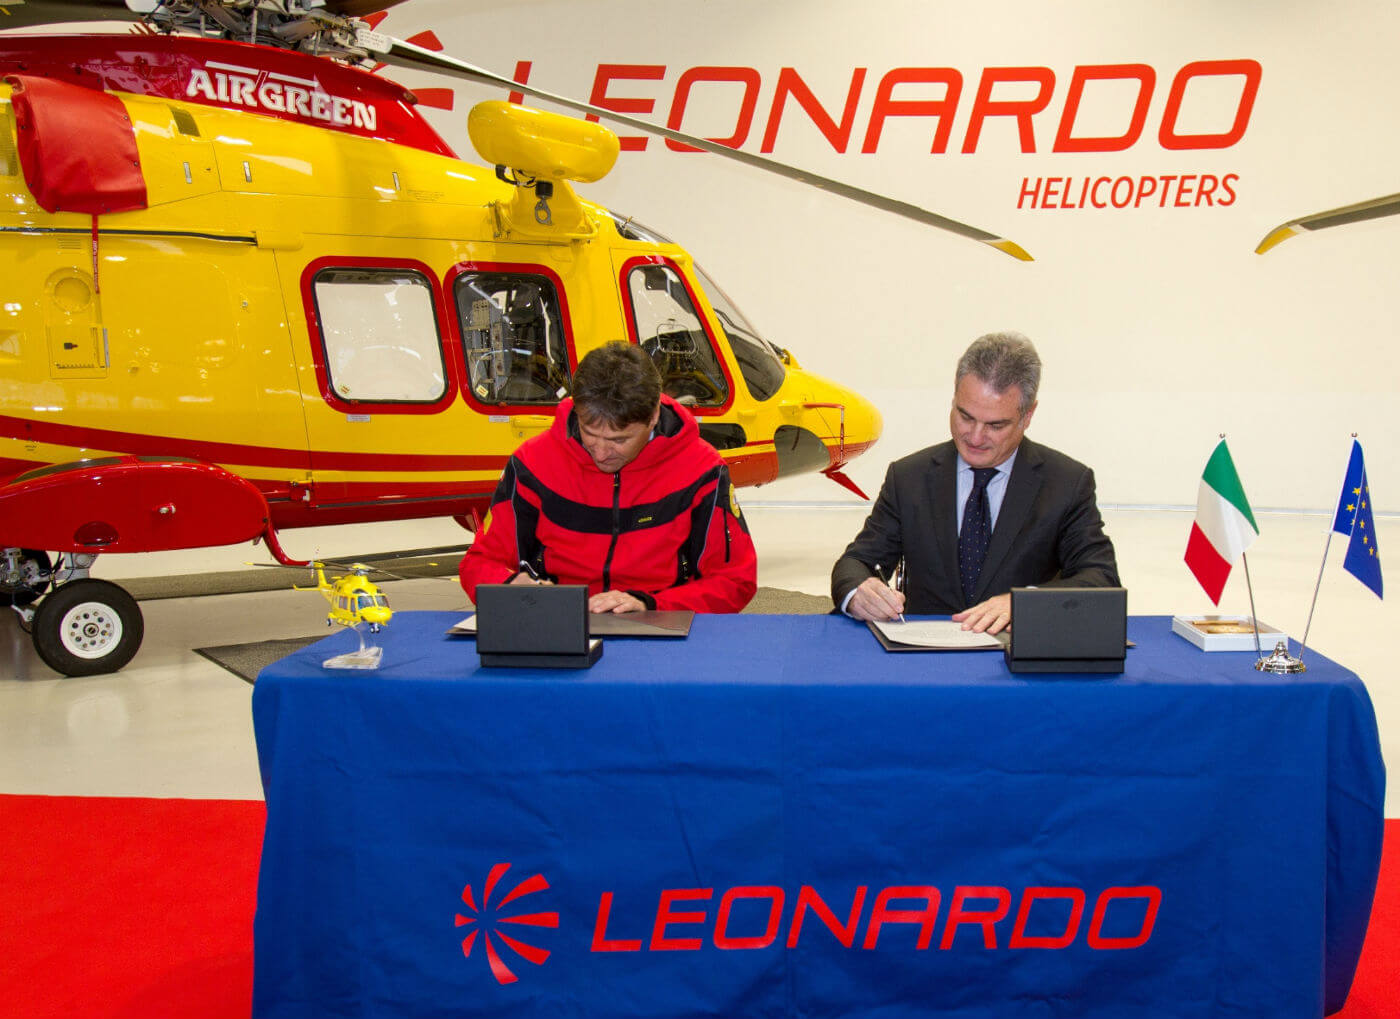 The agreement was signed during an official ceremony held at the Leonardo facility of Vergiate, which was attended by top representatives of CNSAS and Leonardo Helicopters in front of the new AgustaWestland AW169. CNSAS Photo